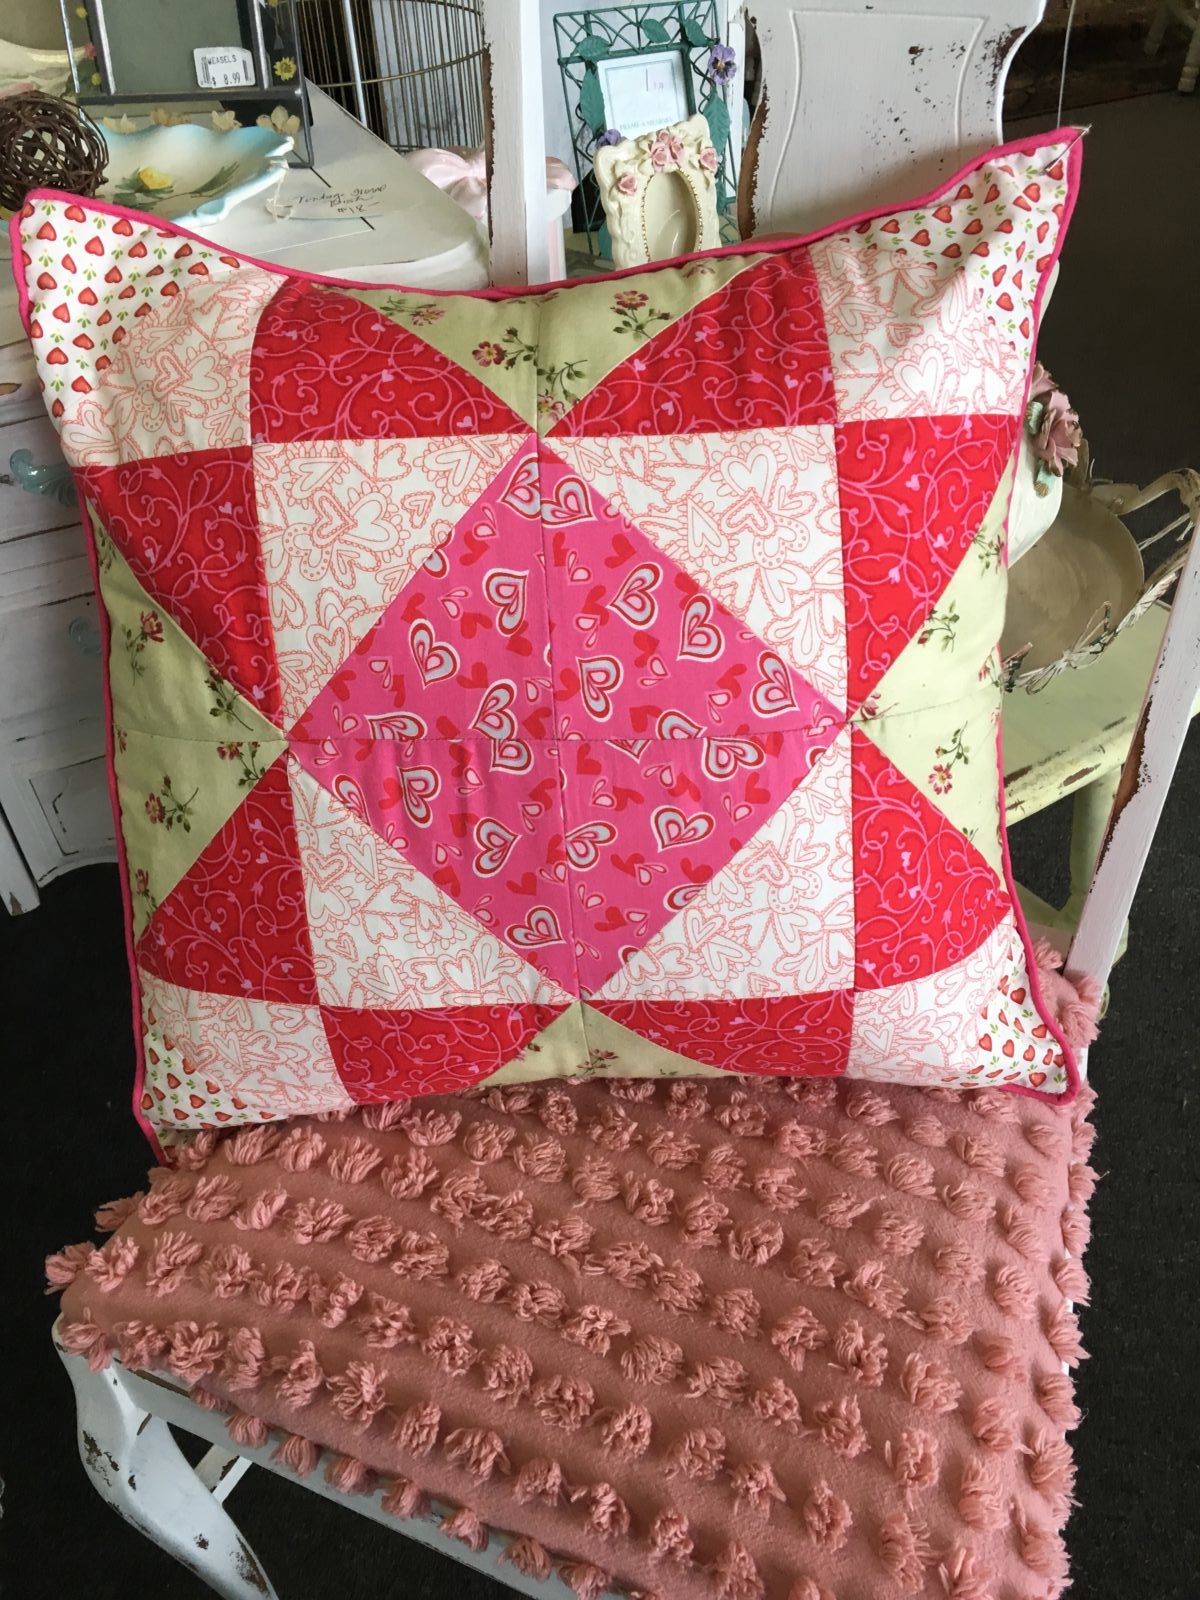 Heart Quilted Pillow • Charming hand made Pillow with assorted heart fabrics Quilted into a decorative 18" x 18" Pillow with a piped pink edge. Split back for cleaning or changing the insert out.